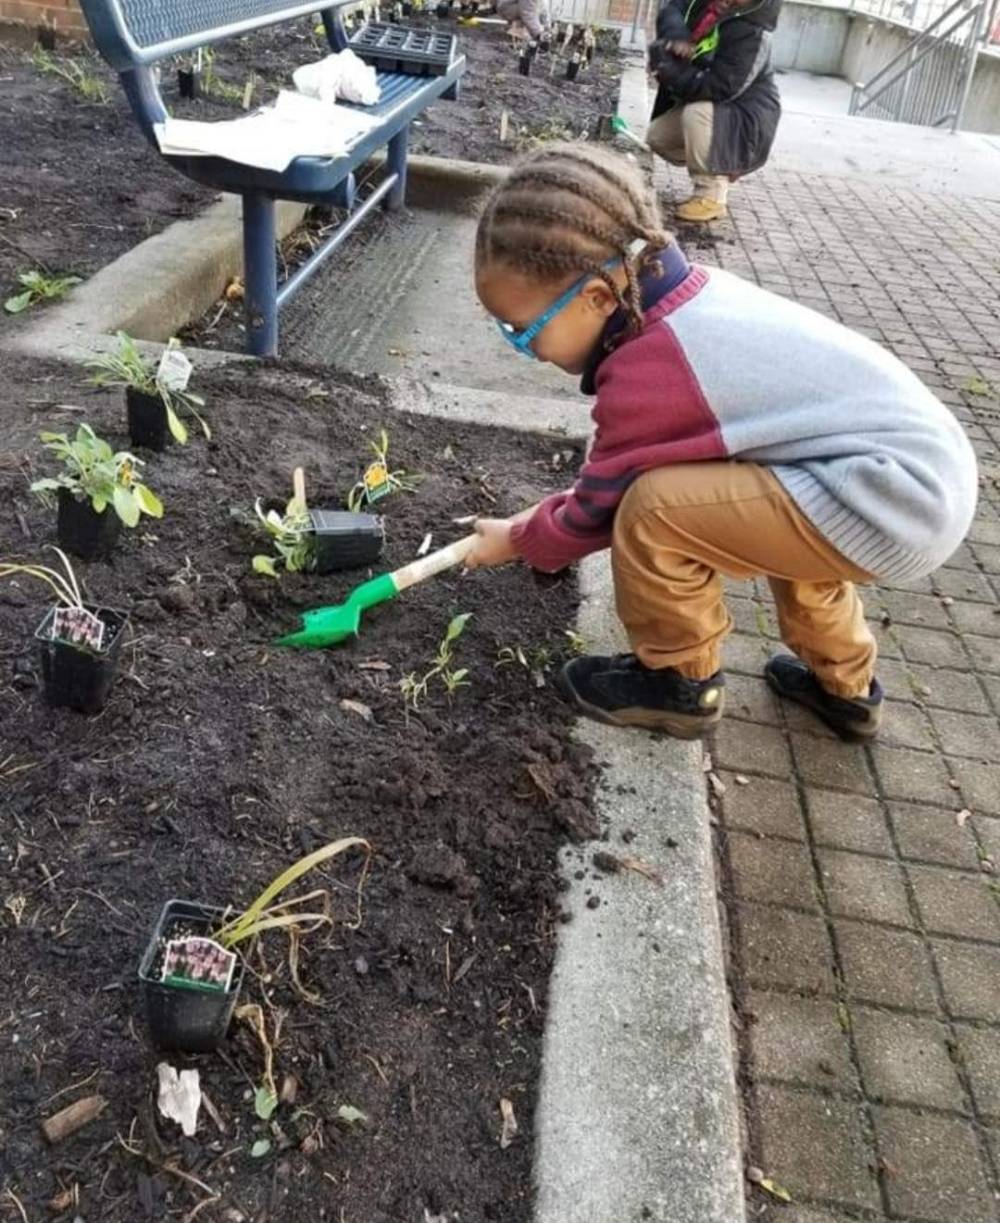 Coit CAA - Students planting with trowel